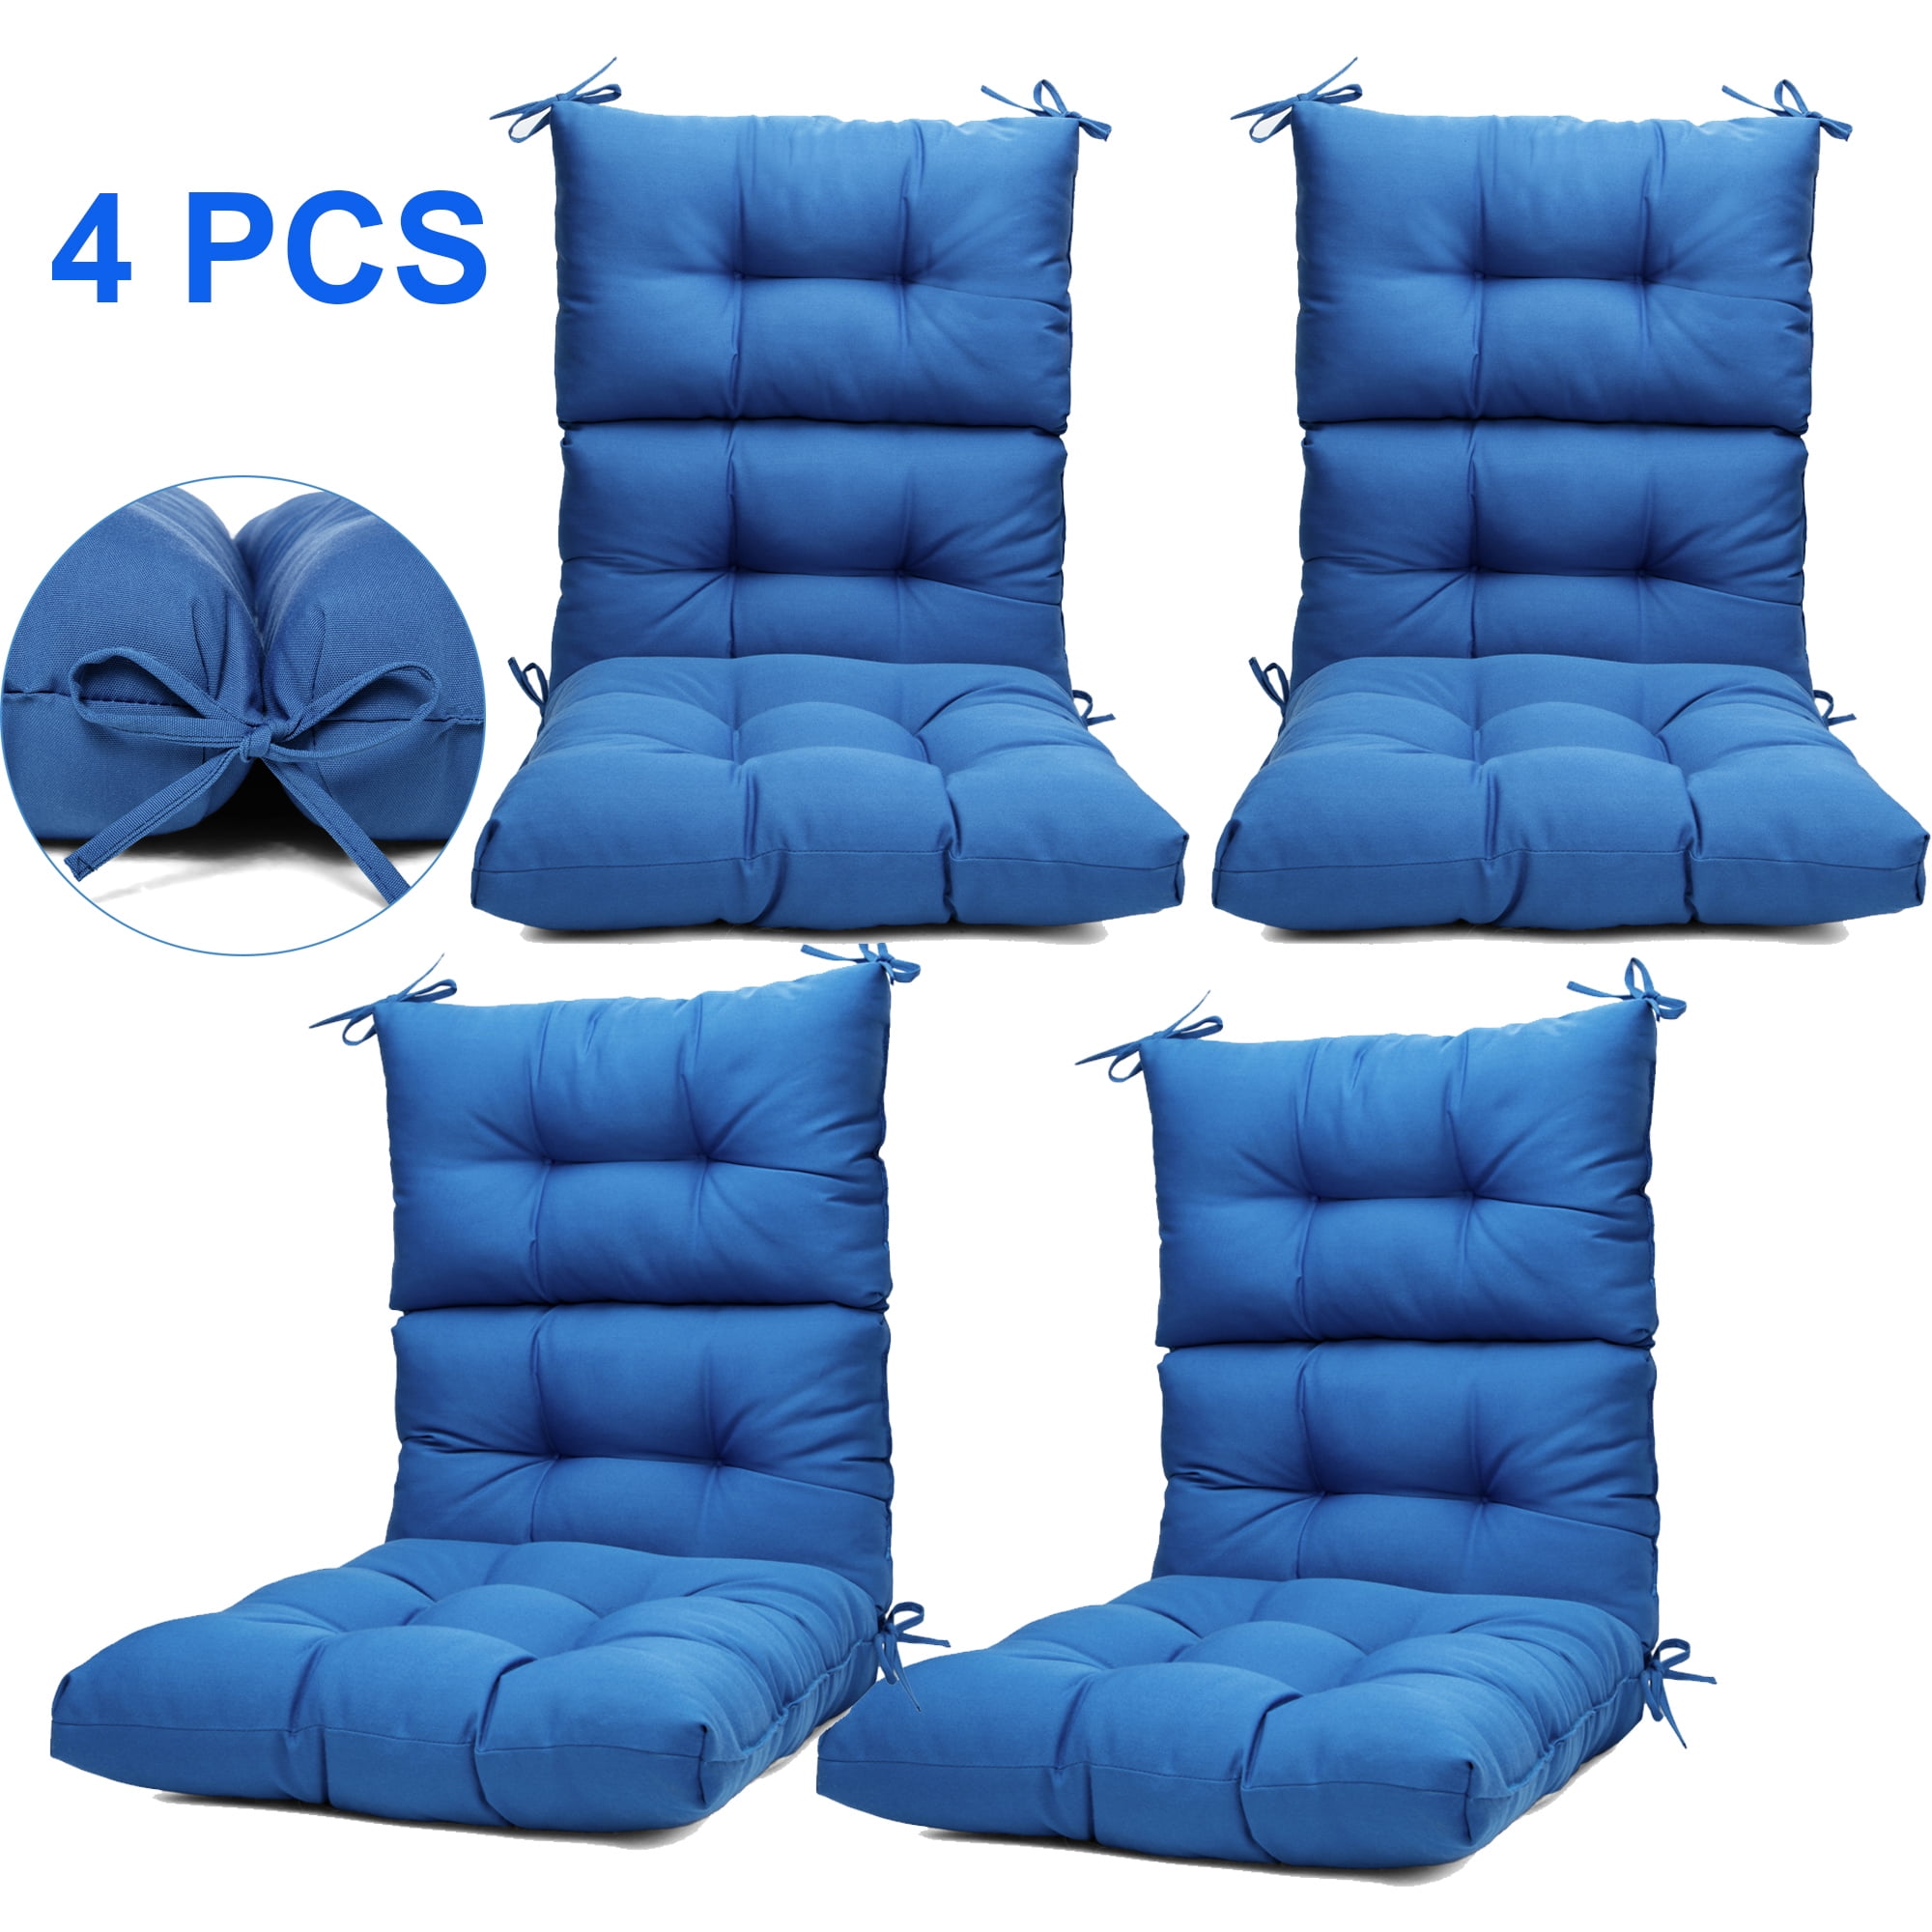 1/4Pcs Waterproof Outdoor High Back Chair Cover Yard Patio Furniture Protection 